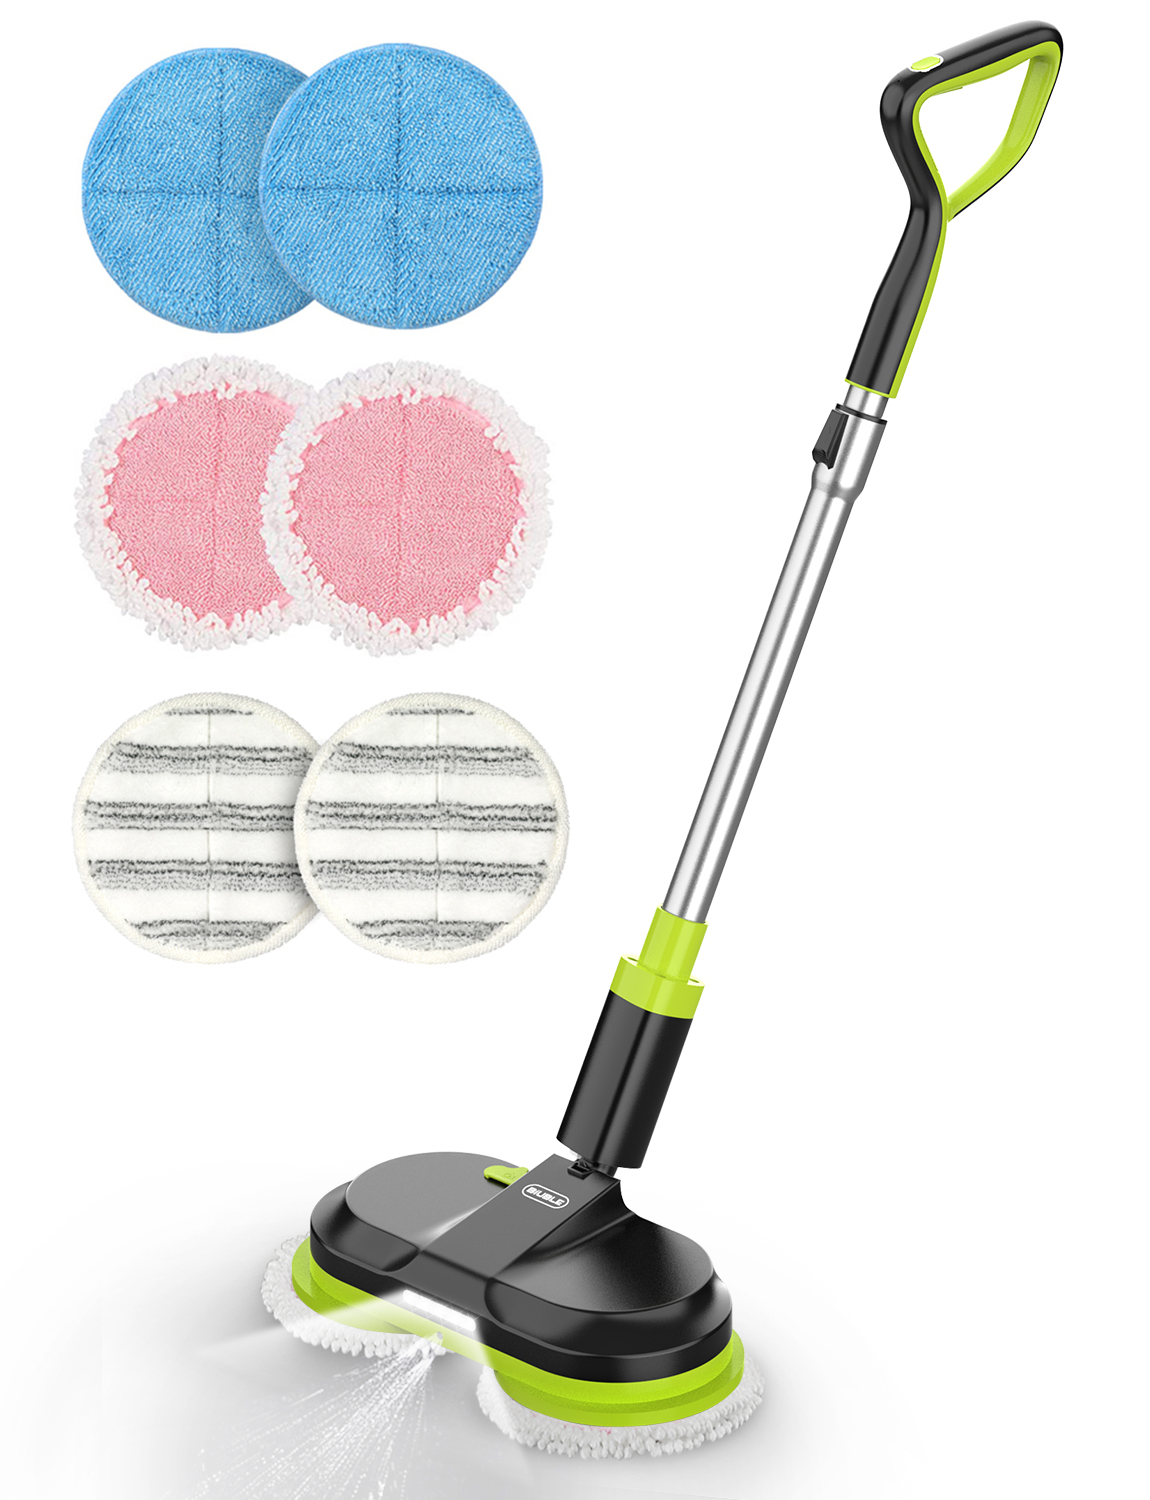  BIUBLE Electric Spin Scrubber, Cordless Power